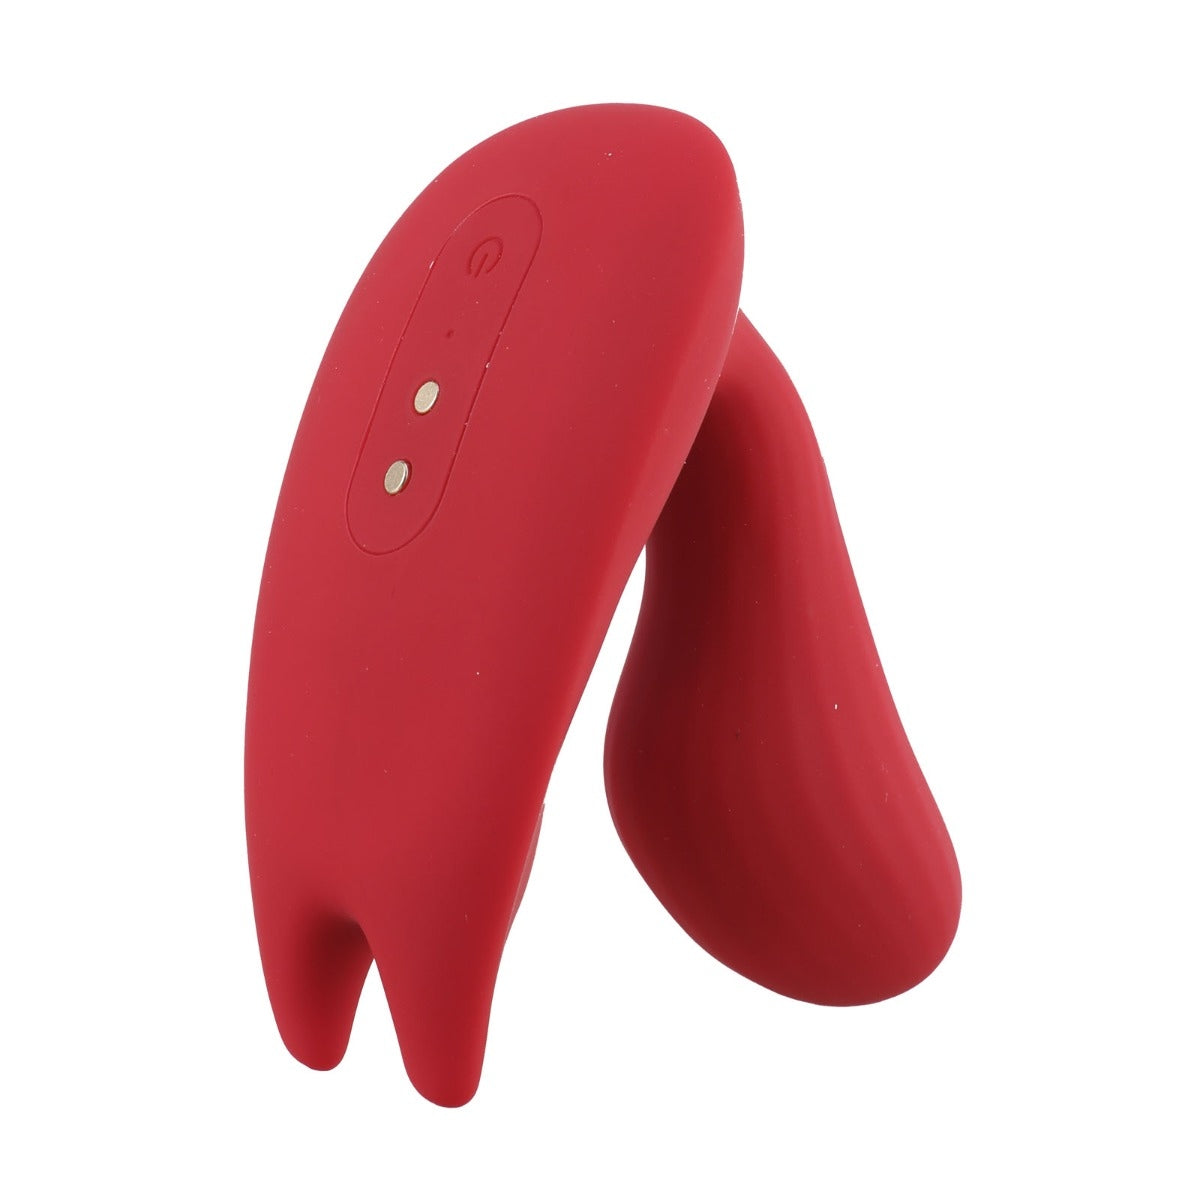 Magic Motion Umi Smart Lay On Vibrator App Controlled Red